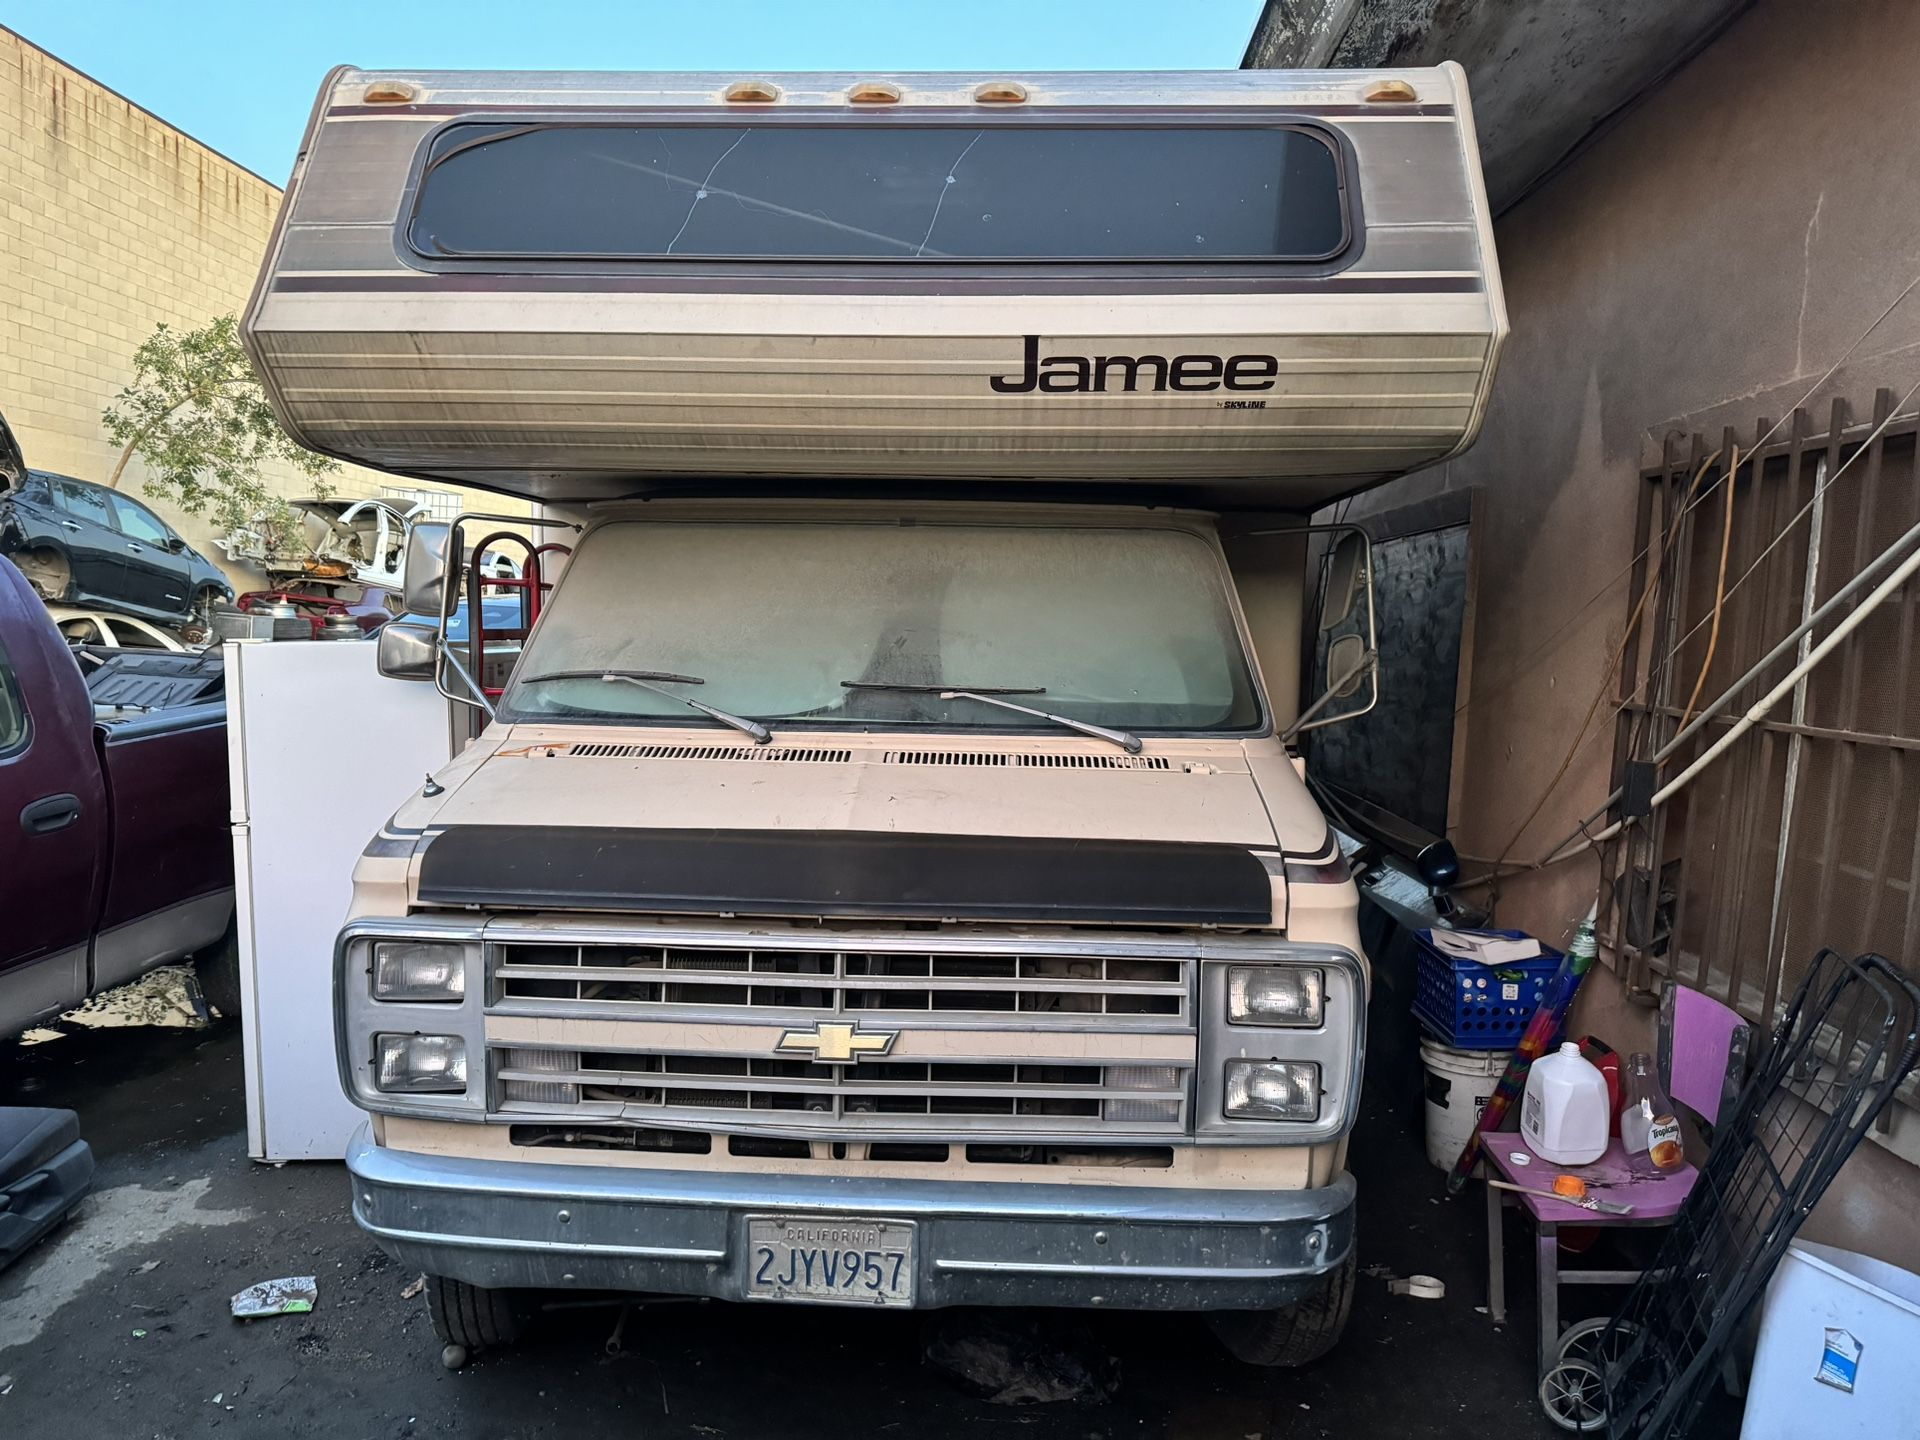 1985 Chevy Jamee  By Skyline Rv Motor Great Deal For The Great Price